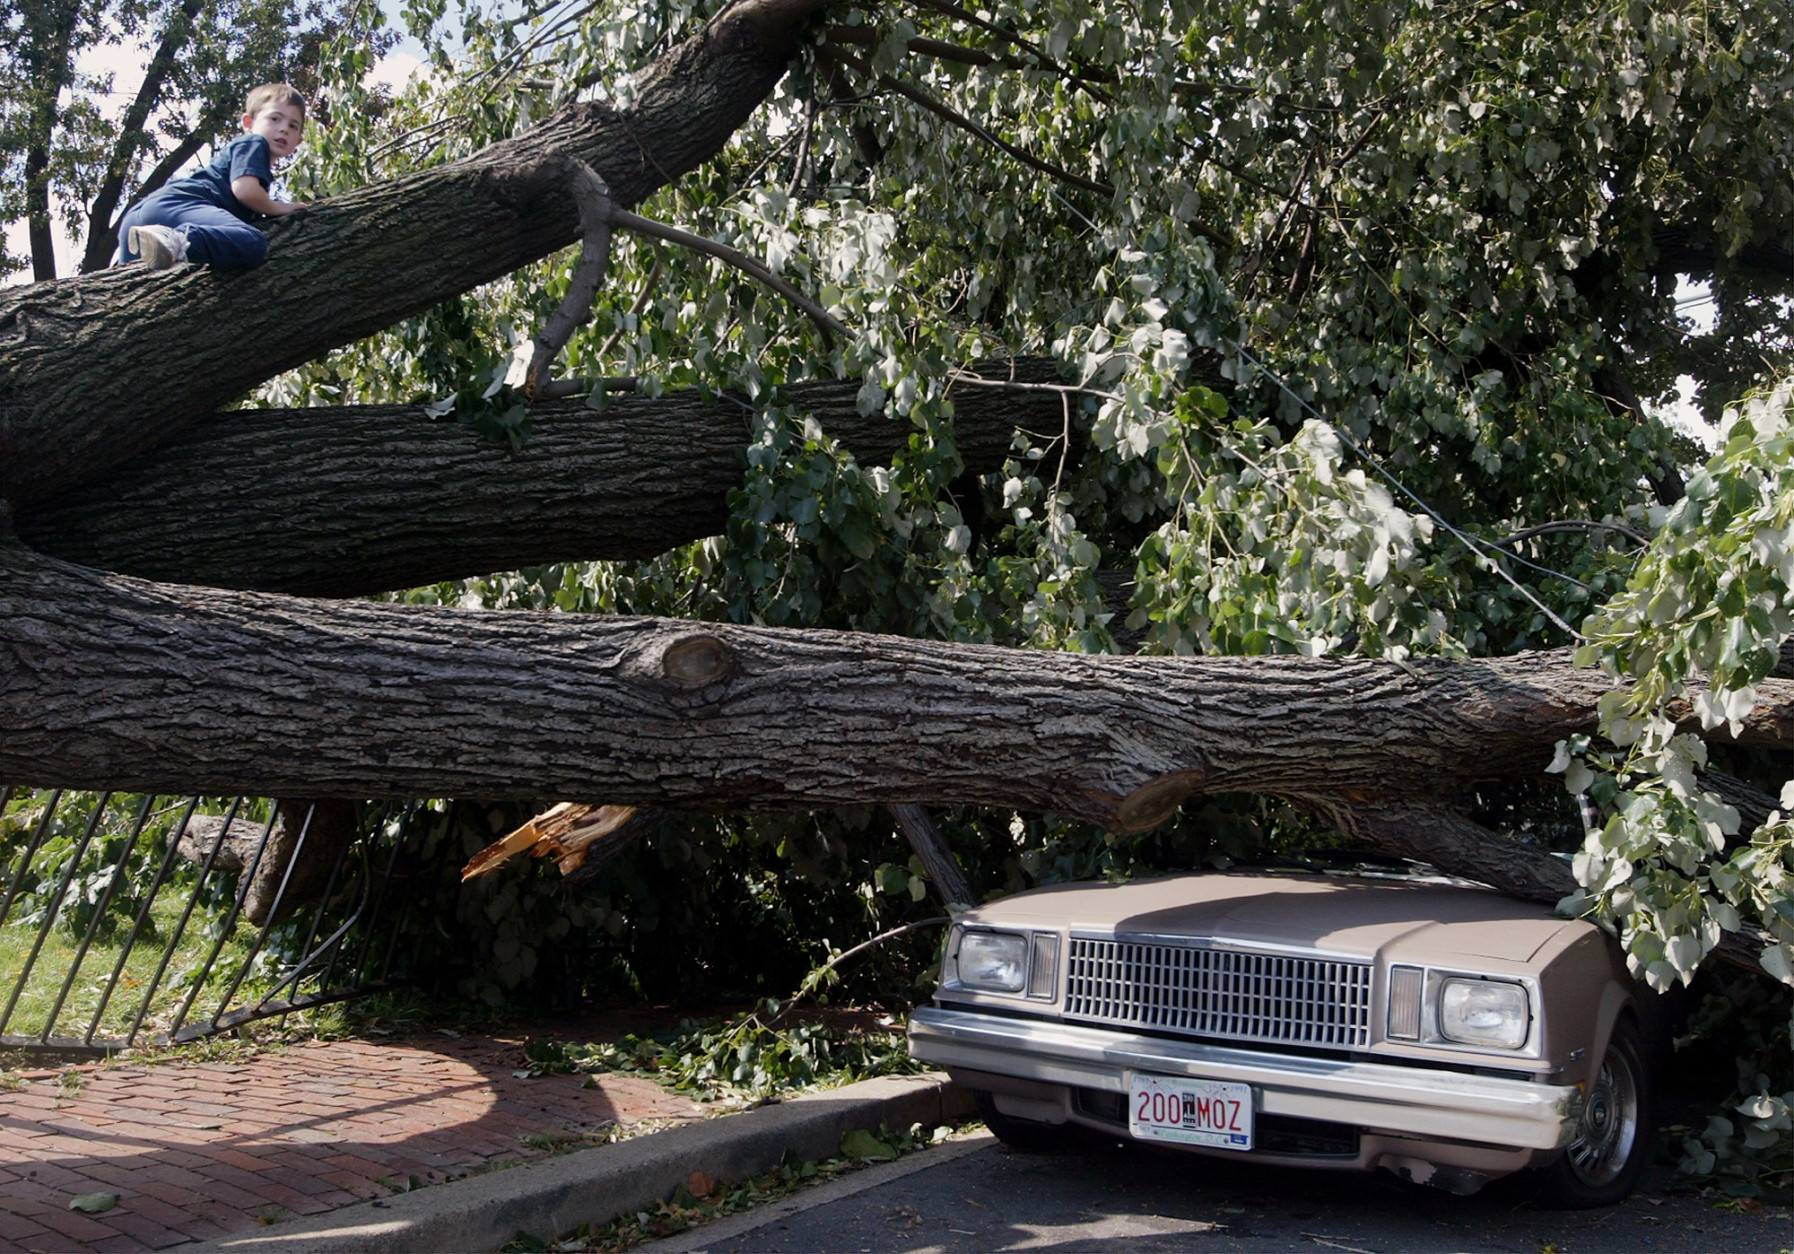 Tyler Lavigne, 5,left, of Washington, crawls on a tree that was blown over by Hurricane Isabel , Friday, Sept. 19, 2003 in Washington. The capital city suffered from a rare power vacuum Friday. Thousands of residents were without lights, hundreds of trees littered the landscape and all three branches of government were basically shut down. Lights were out at the Supreme Court and federal offices; President Bush remained at his secluded mountaintop retreat in Maryland and members of Congress for the most part stayed out of town. (AP Photo/Evan Vucci)